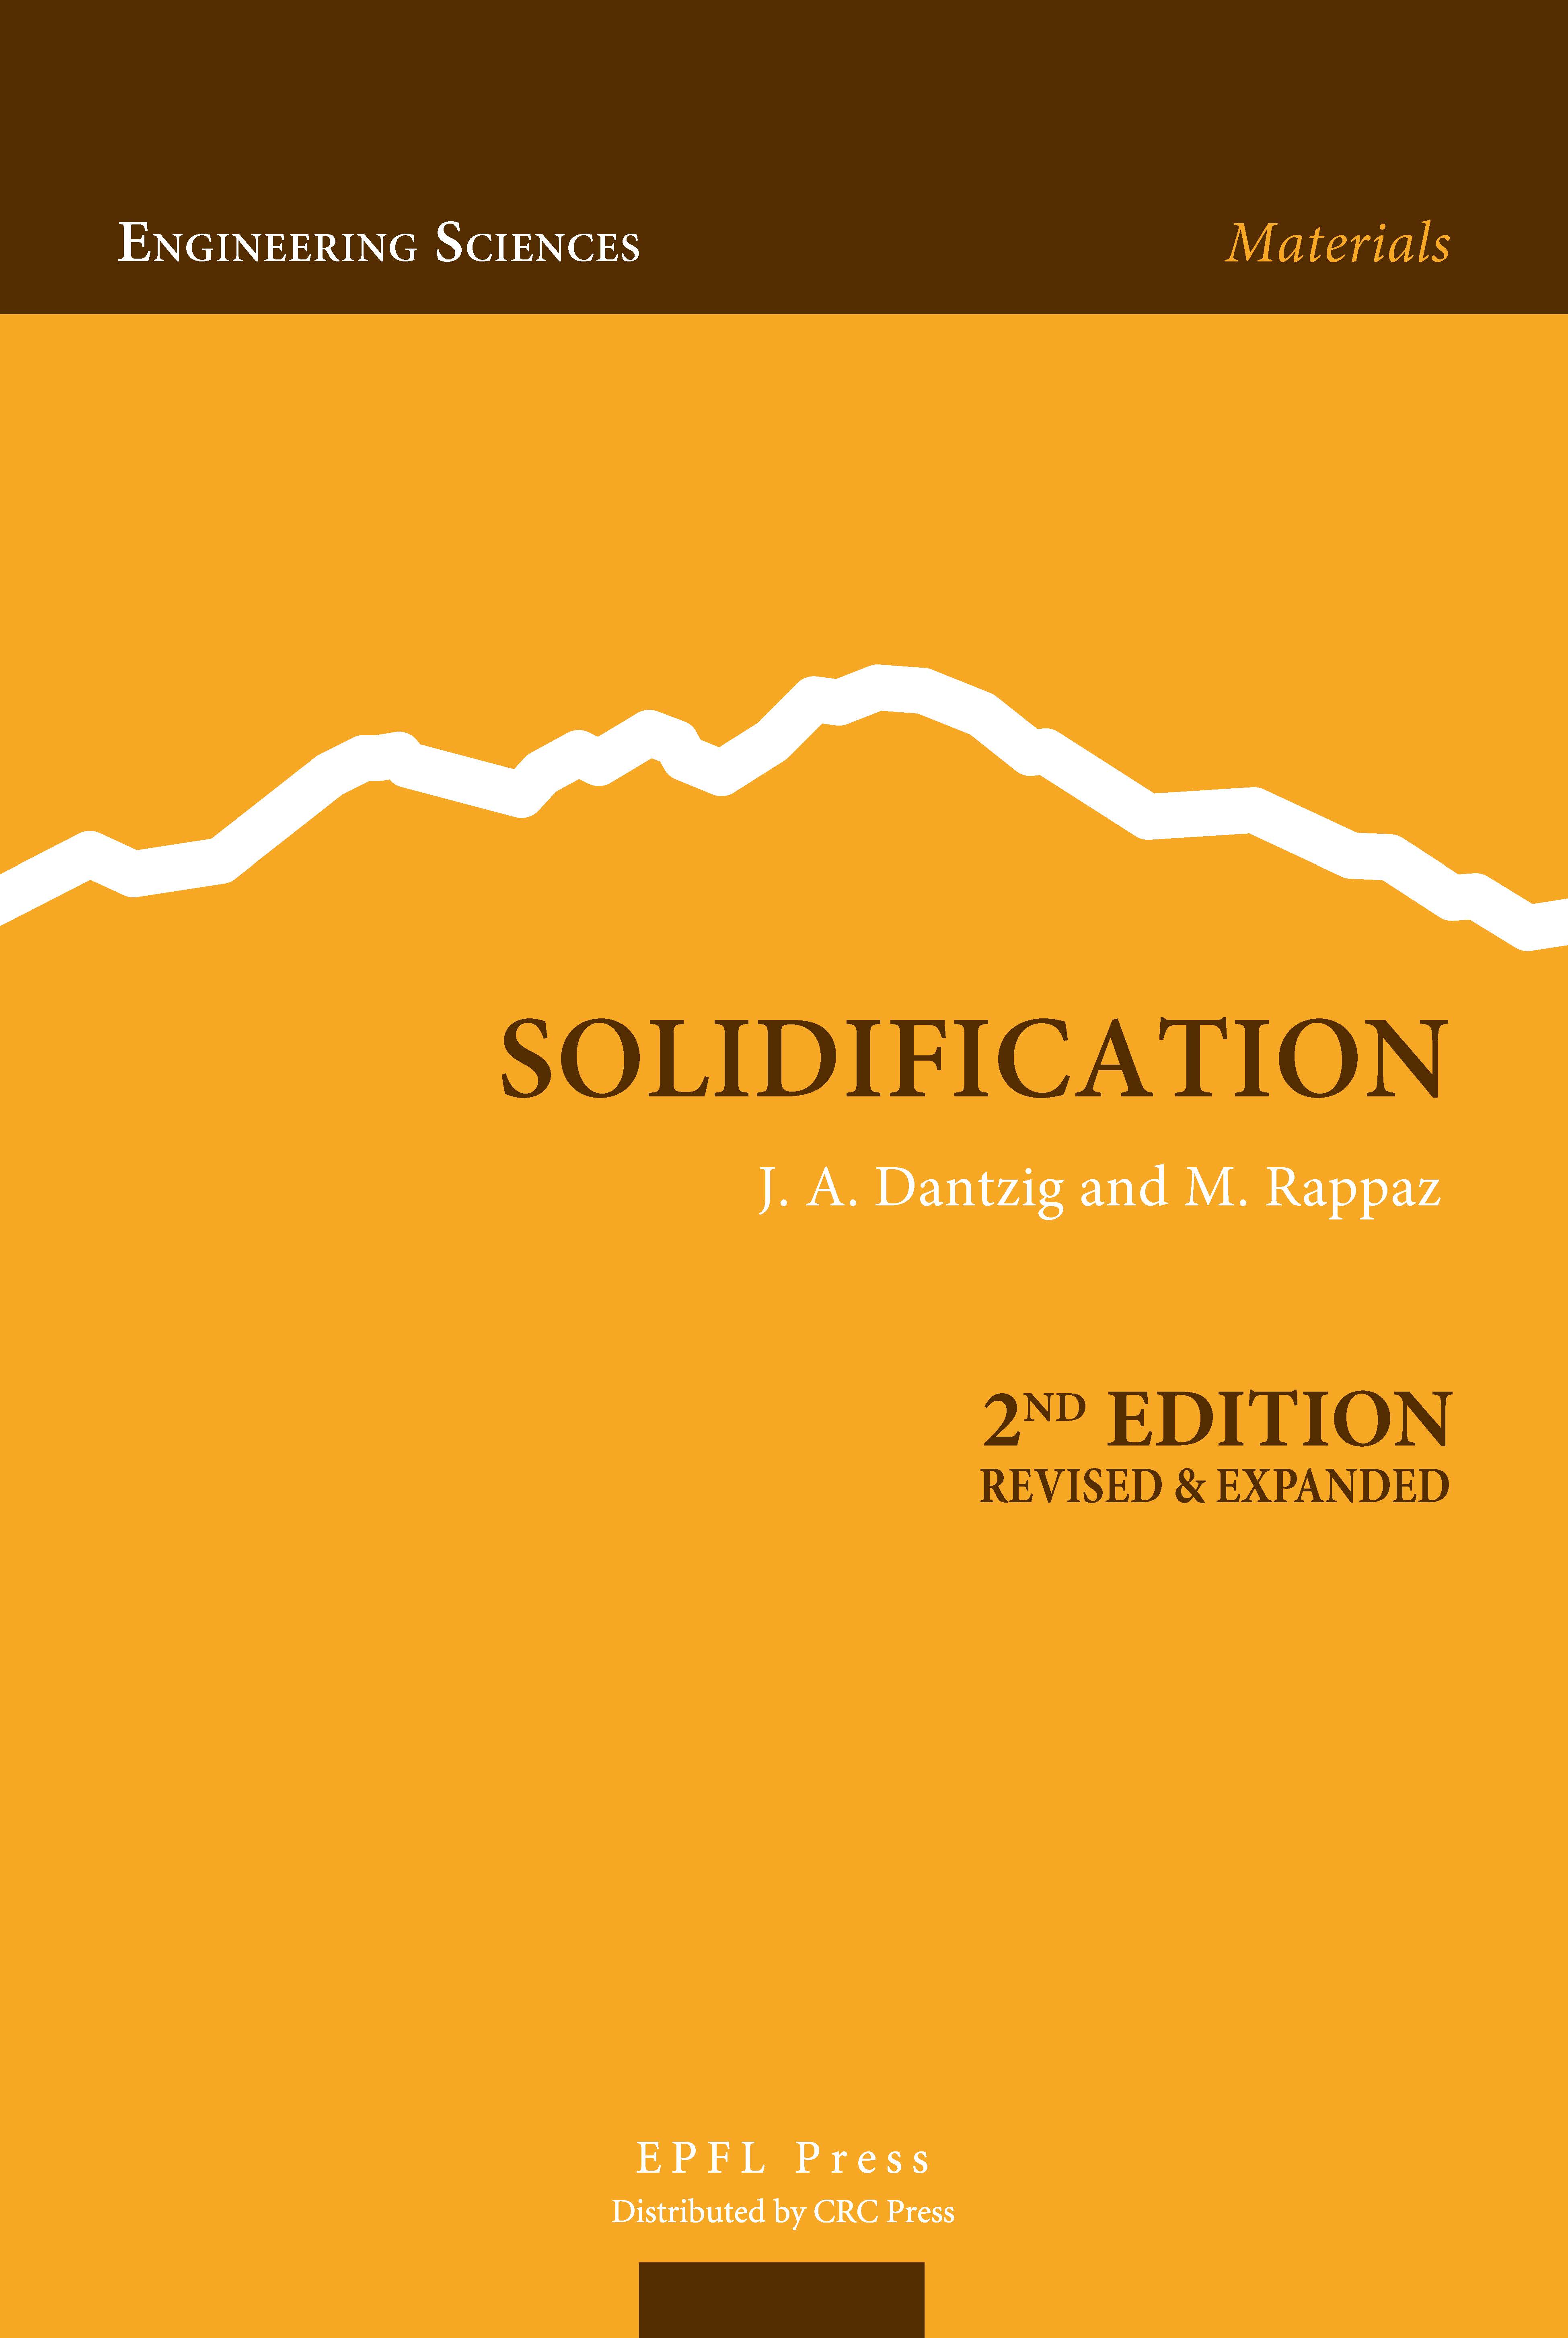 Solidification - 2nd Edition - Revised & Expanded - Jonathan A. Dantzig